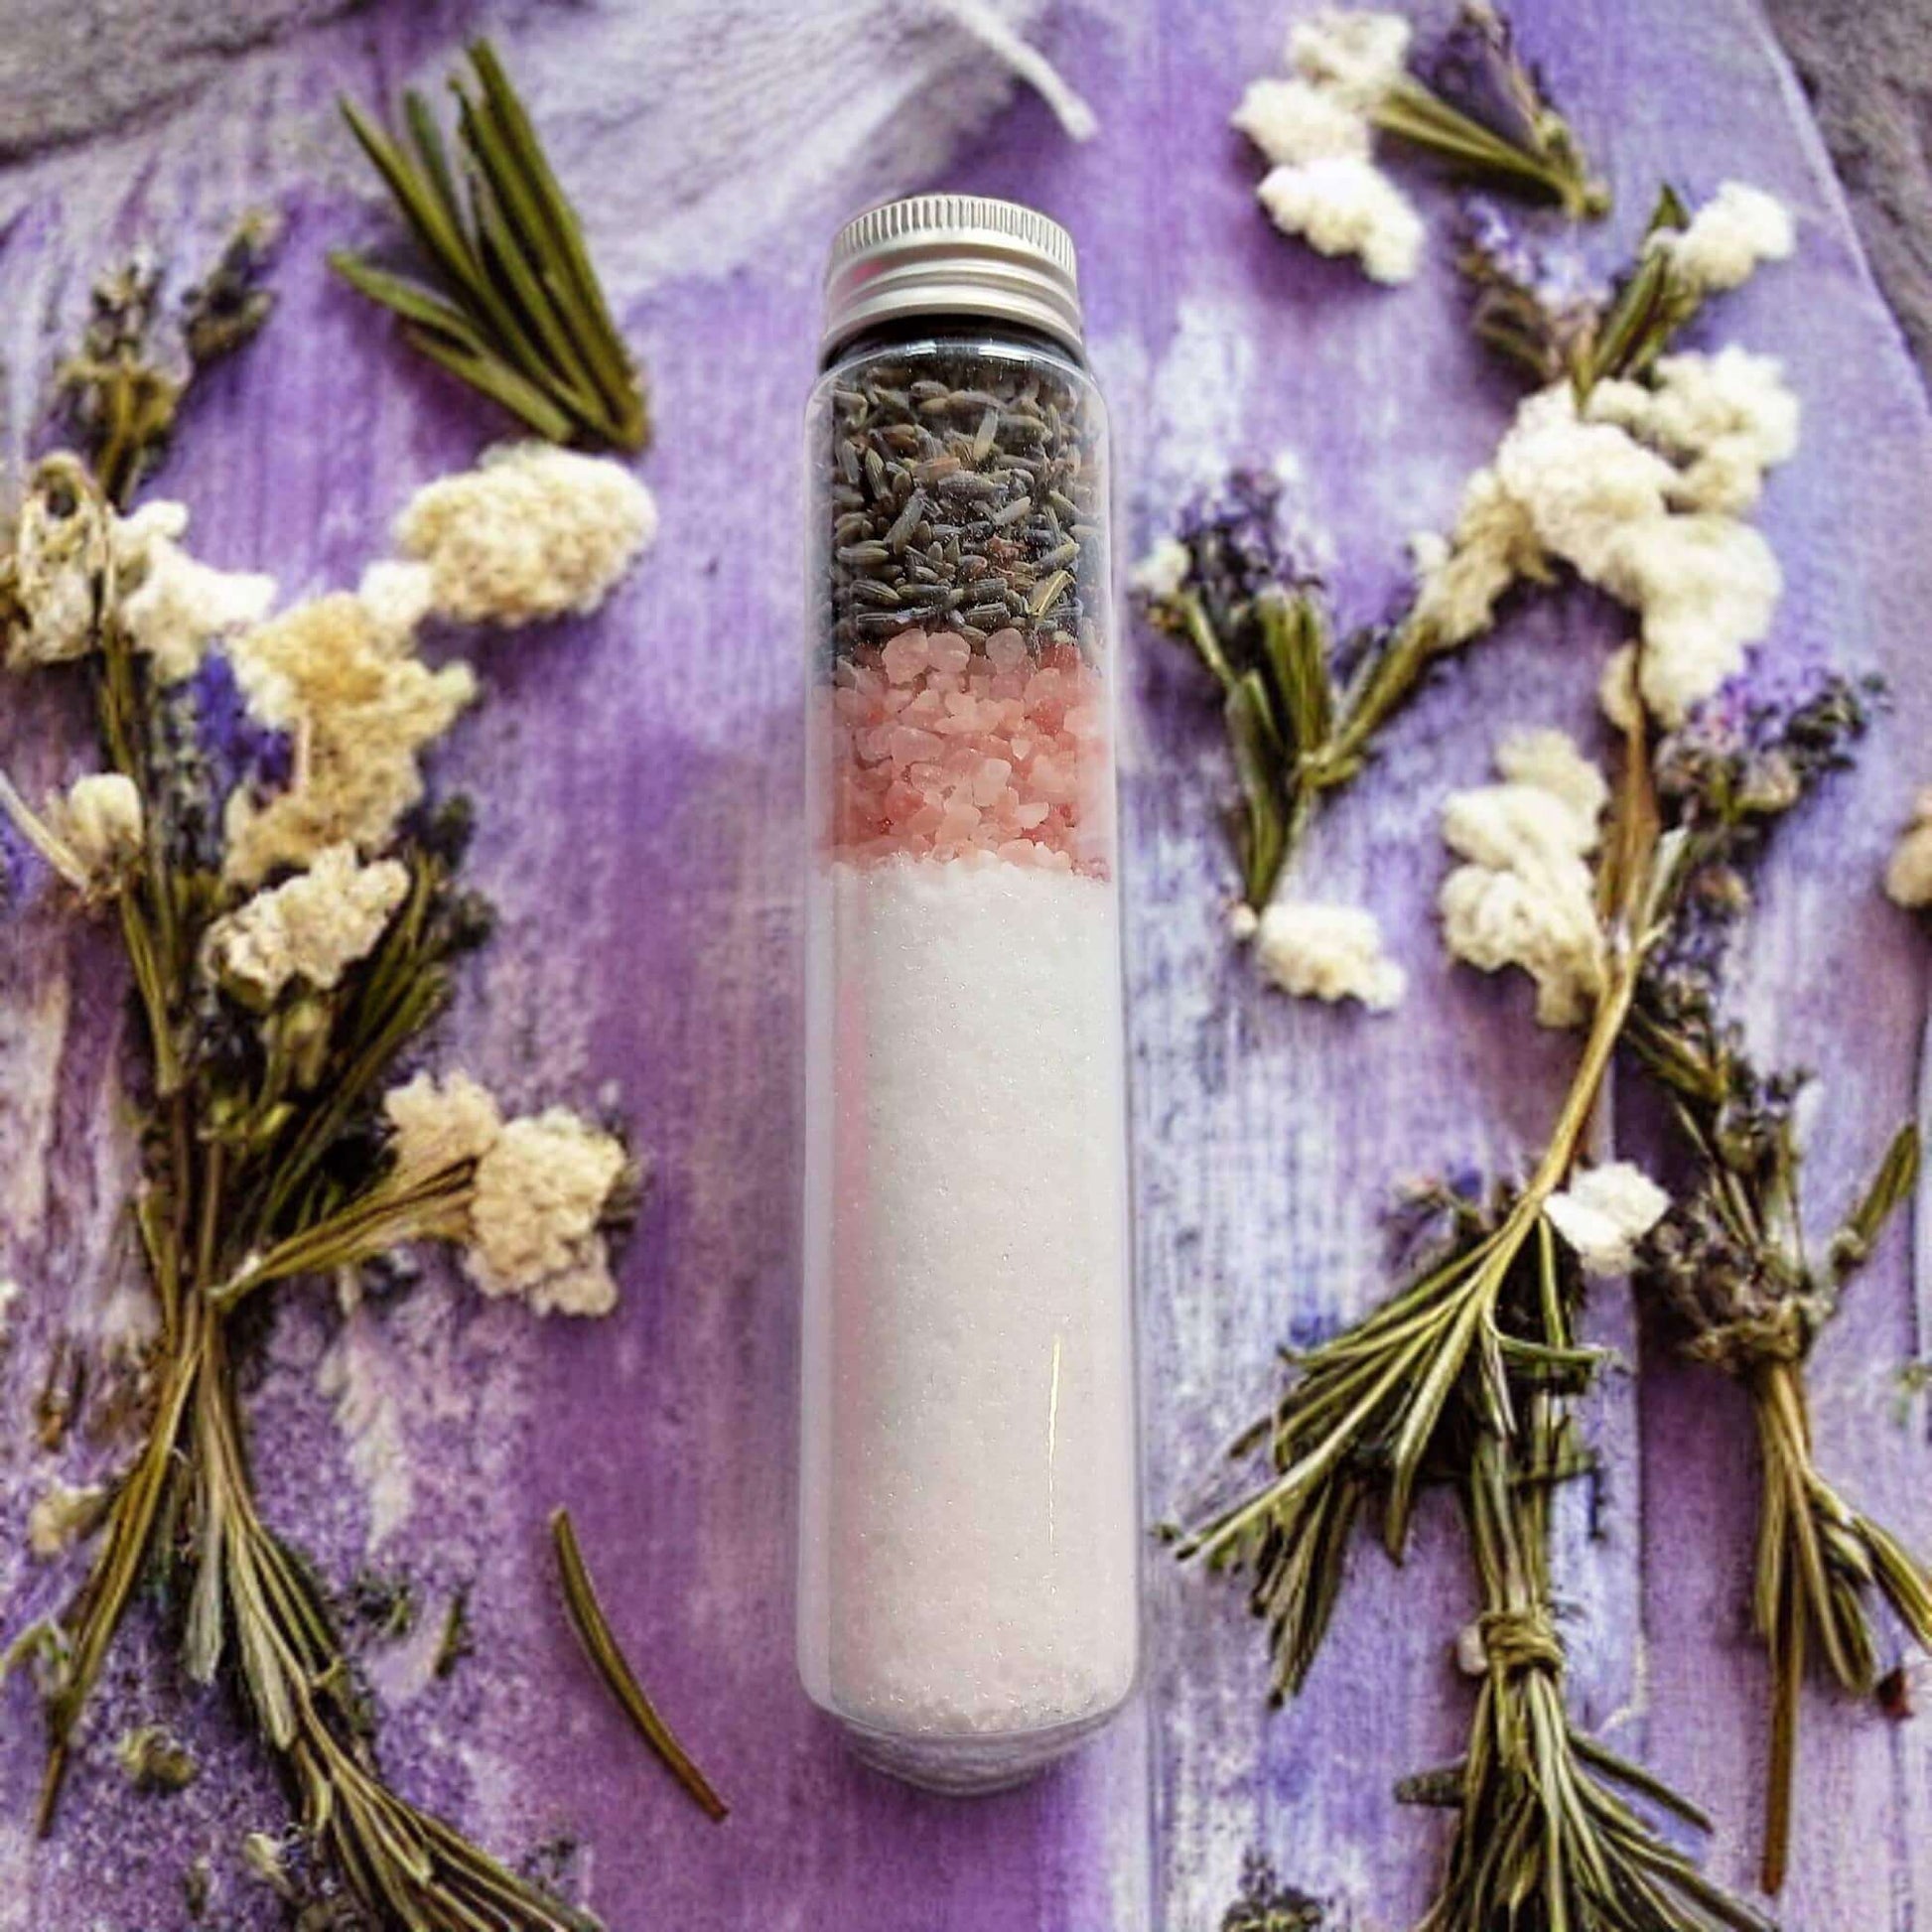 Experience the tranquil aroma of Hidcote lavender in our English botanical bath salt tube. Your spa-like escape awaits.